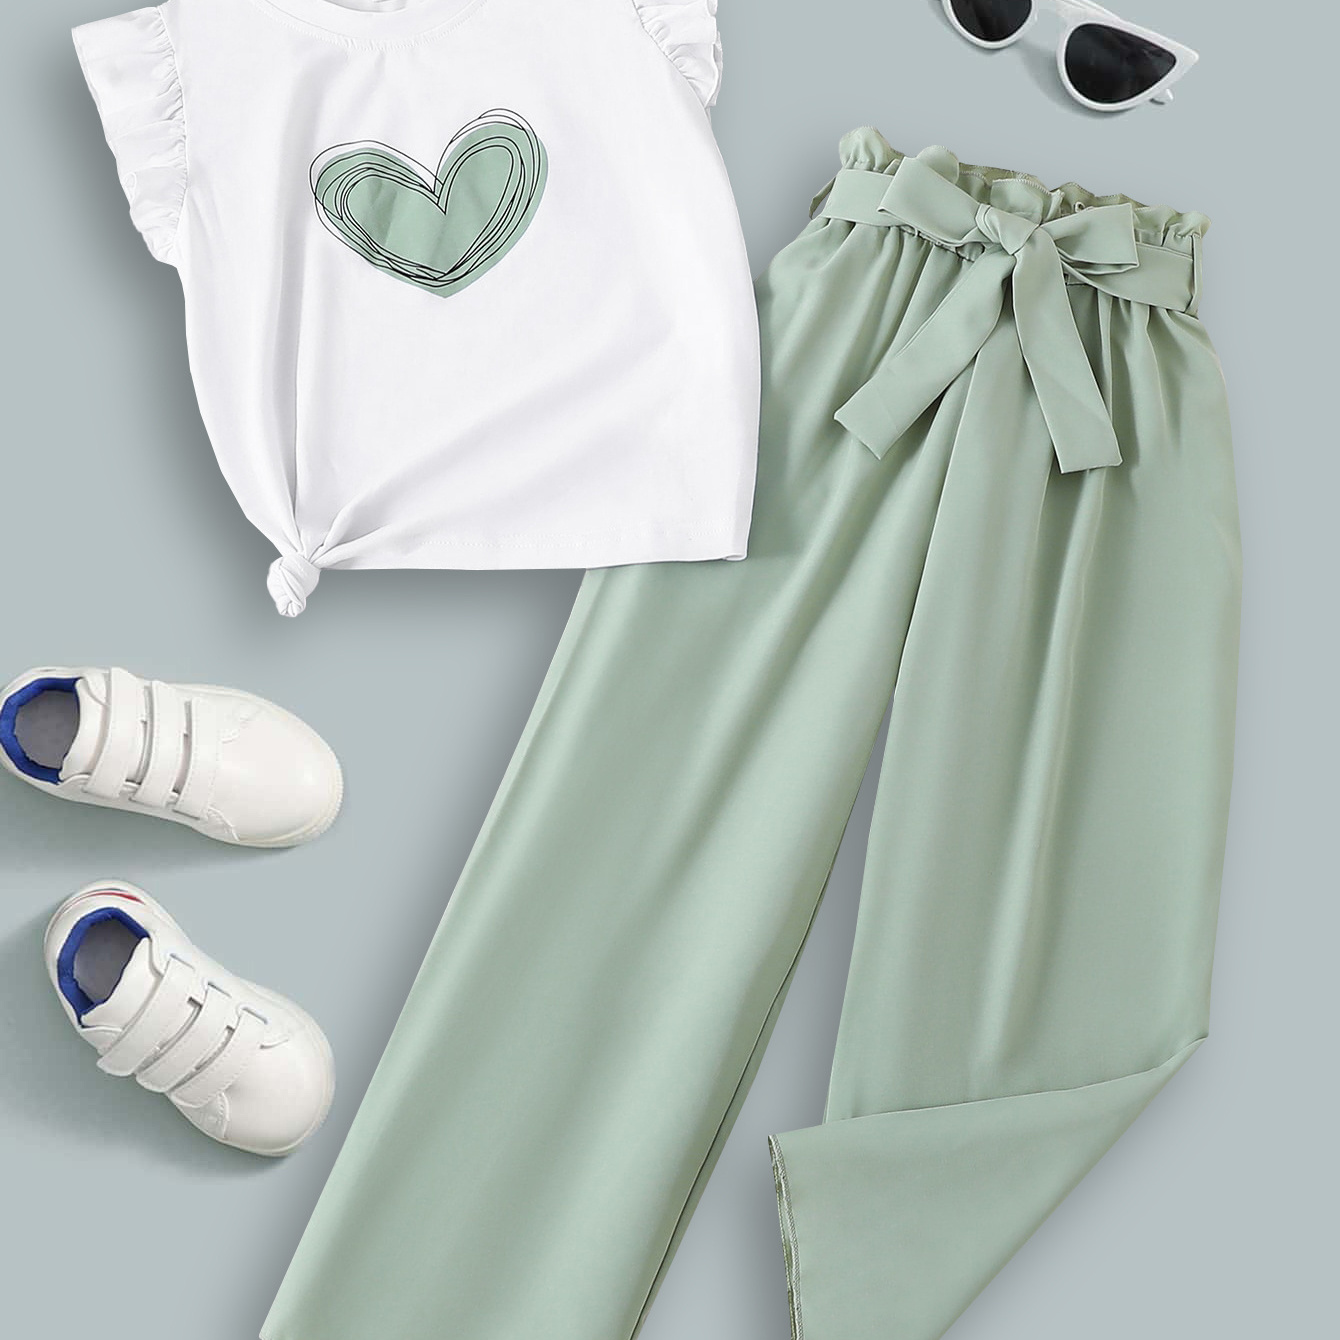 

Girls Stylish & Casual Outfit, 2pcs Doodled Heart Graphic Print Ruffle Trim Tee & Belted Wide-leg Pants For Summer